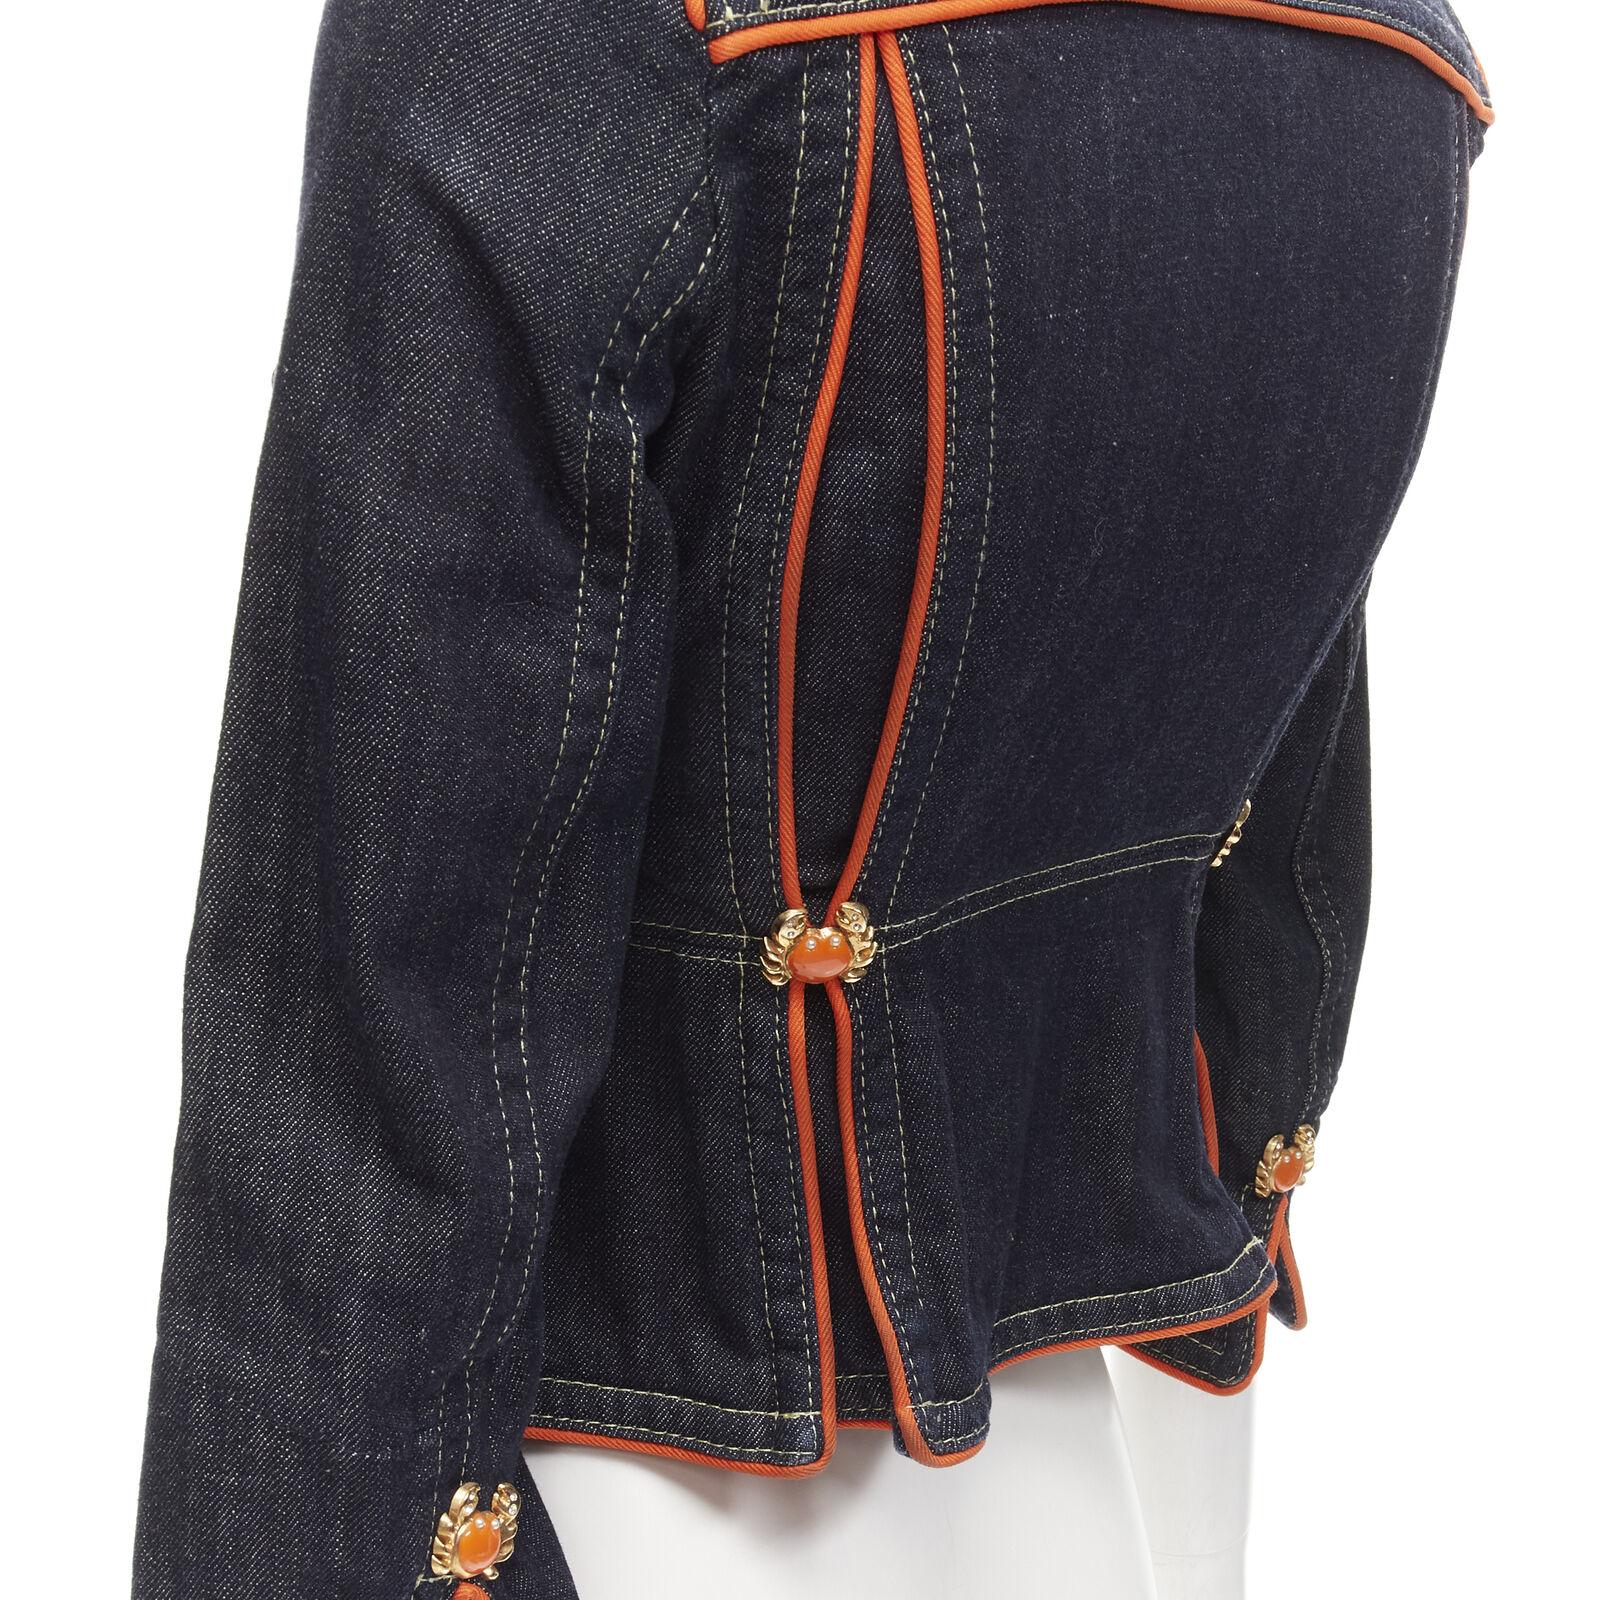 rare DSQUARED2 Vintage Y2K orange crab blue denim cropped jacket IT40 XS
Reference: ANWU/A01014
Brand: Dsquared2
Material: Feels like cotton
Color: Blue, Orange
Pattern: Solid
Closure: Hook & Eye

CONDITION:
Condition: Excellent, this item was